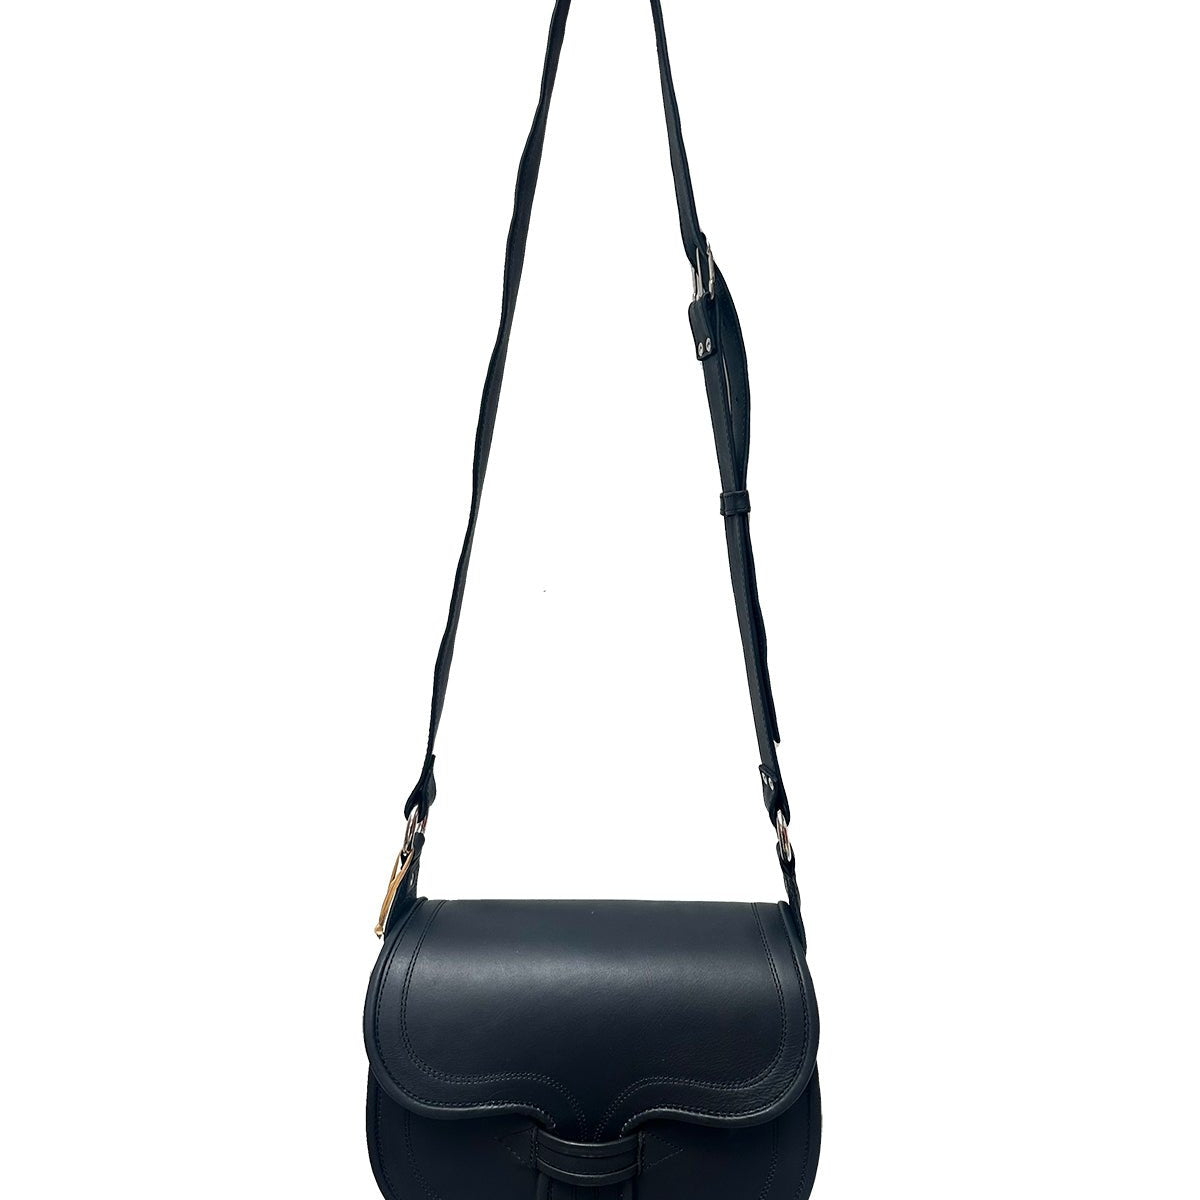 The black Oversized Crossbody Carriel Bag hanging from a hook. The bag has a flap closure with an adjustable strap.